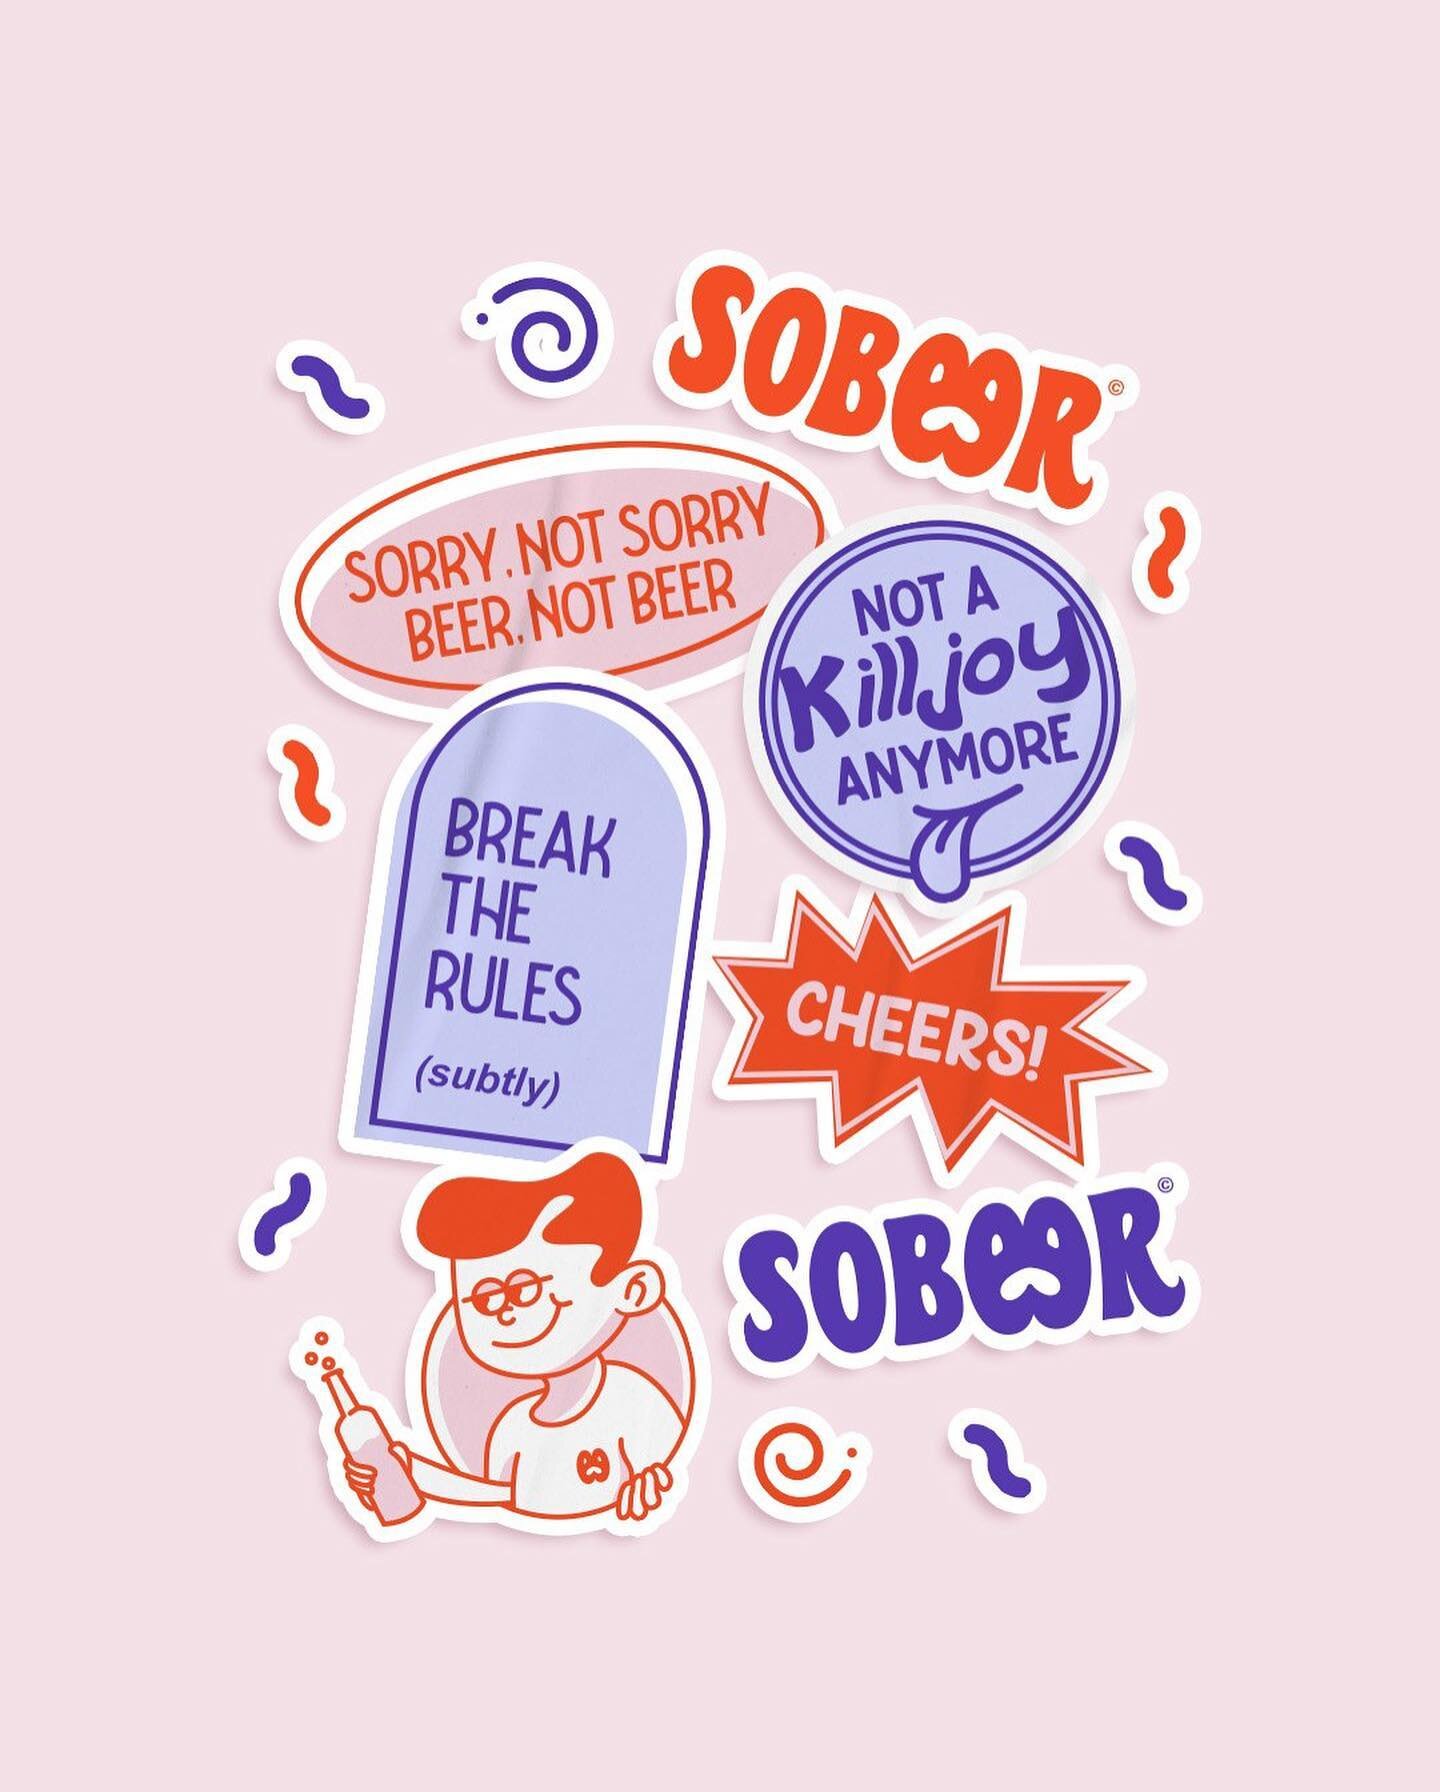 Stickers for Sobeer ✨What's your favorite here? 😜
.
.
.
.
.
.
.
#tbtsobeer #thebrieftribe  #passionproject #brief #freelancer #illustrator #logodesigns #branding #designchallenge #branddesigner #branddesign #designcommunity #brandmark #brandidentity